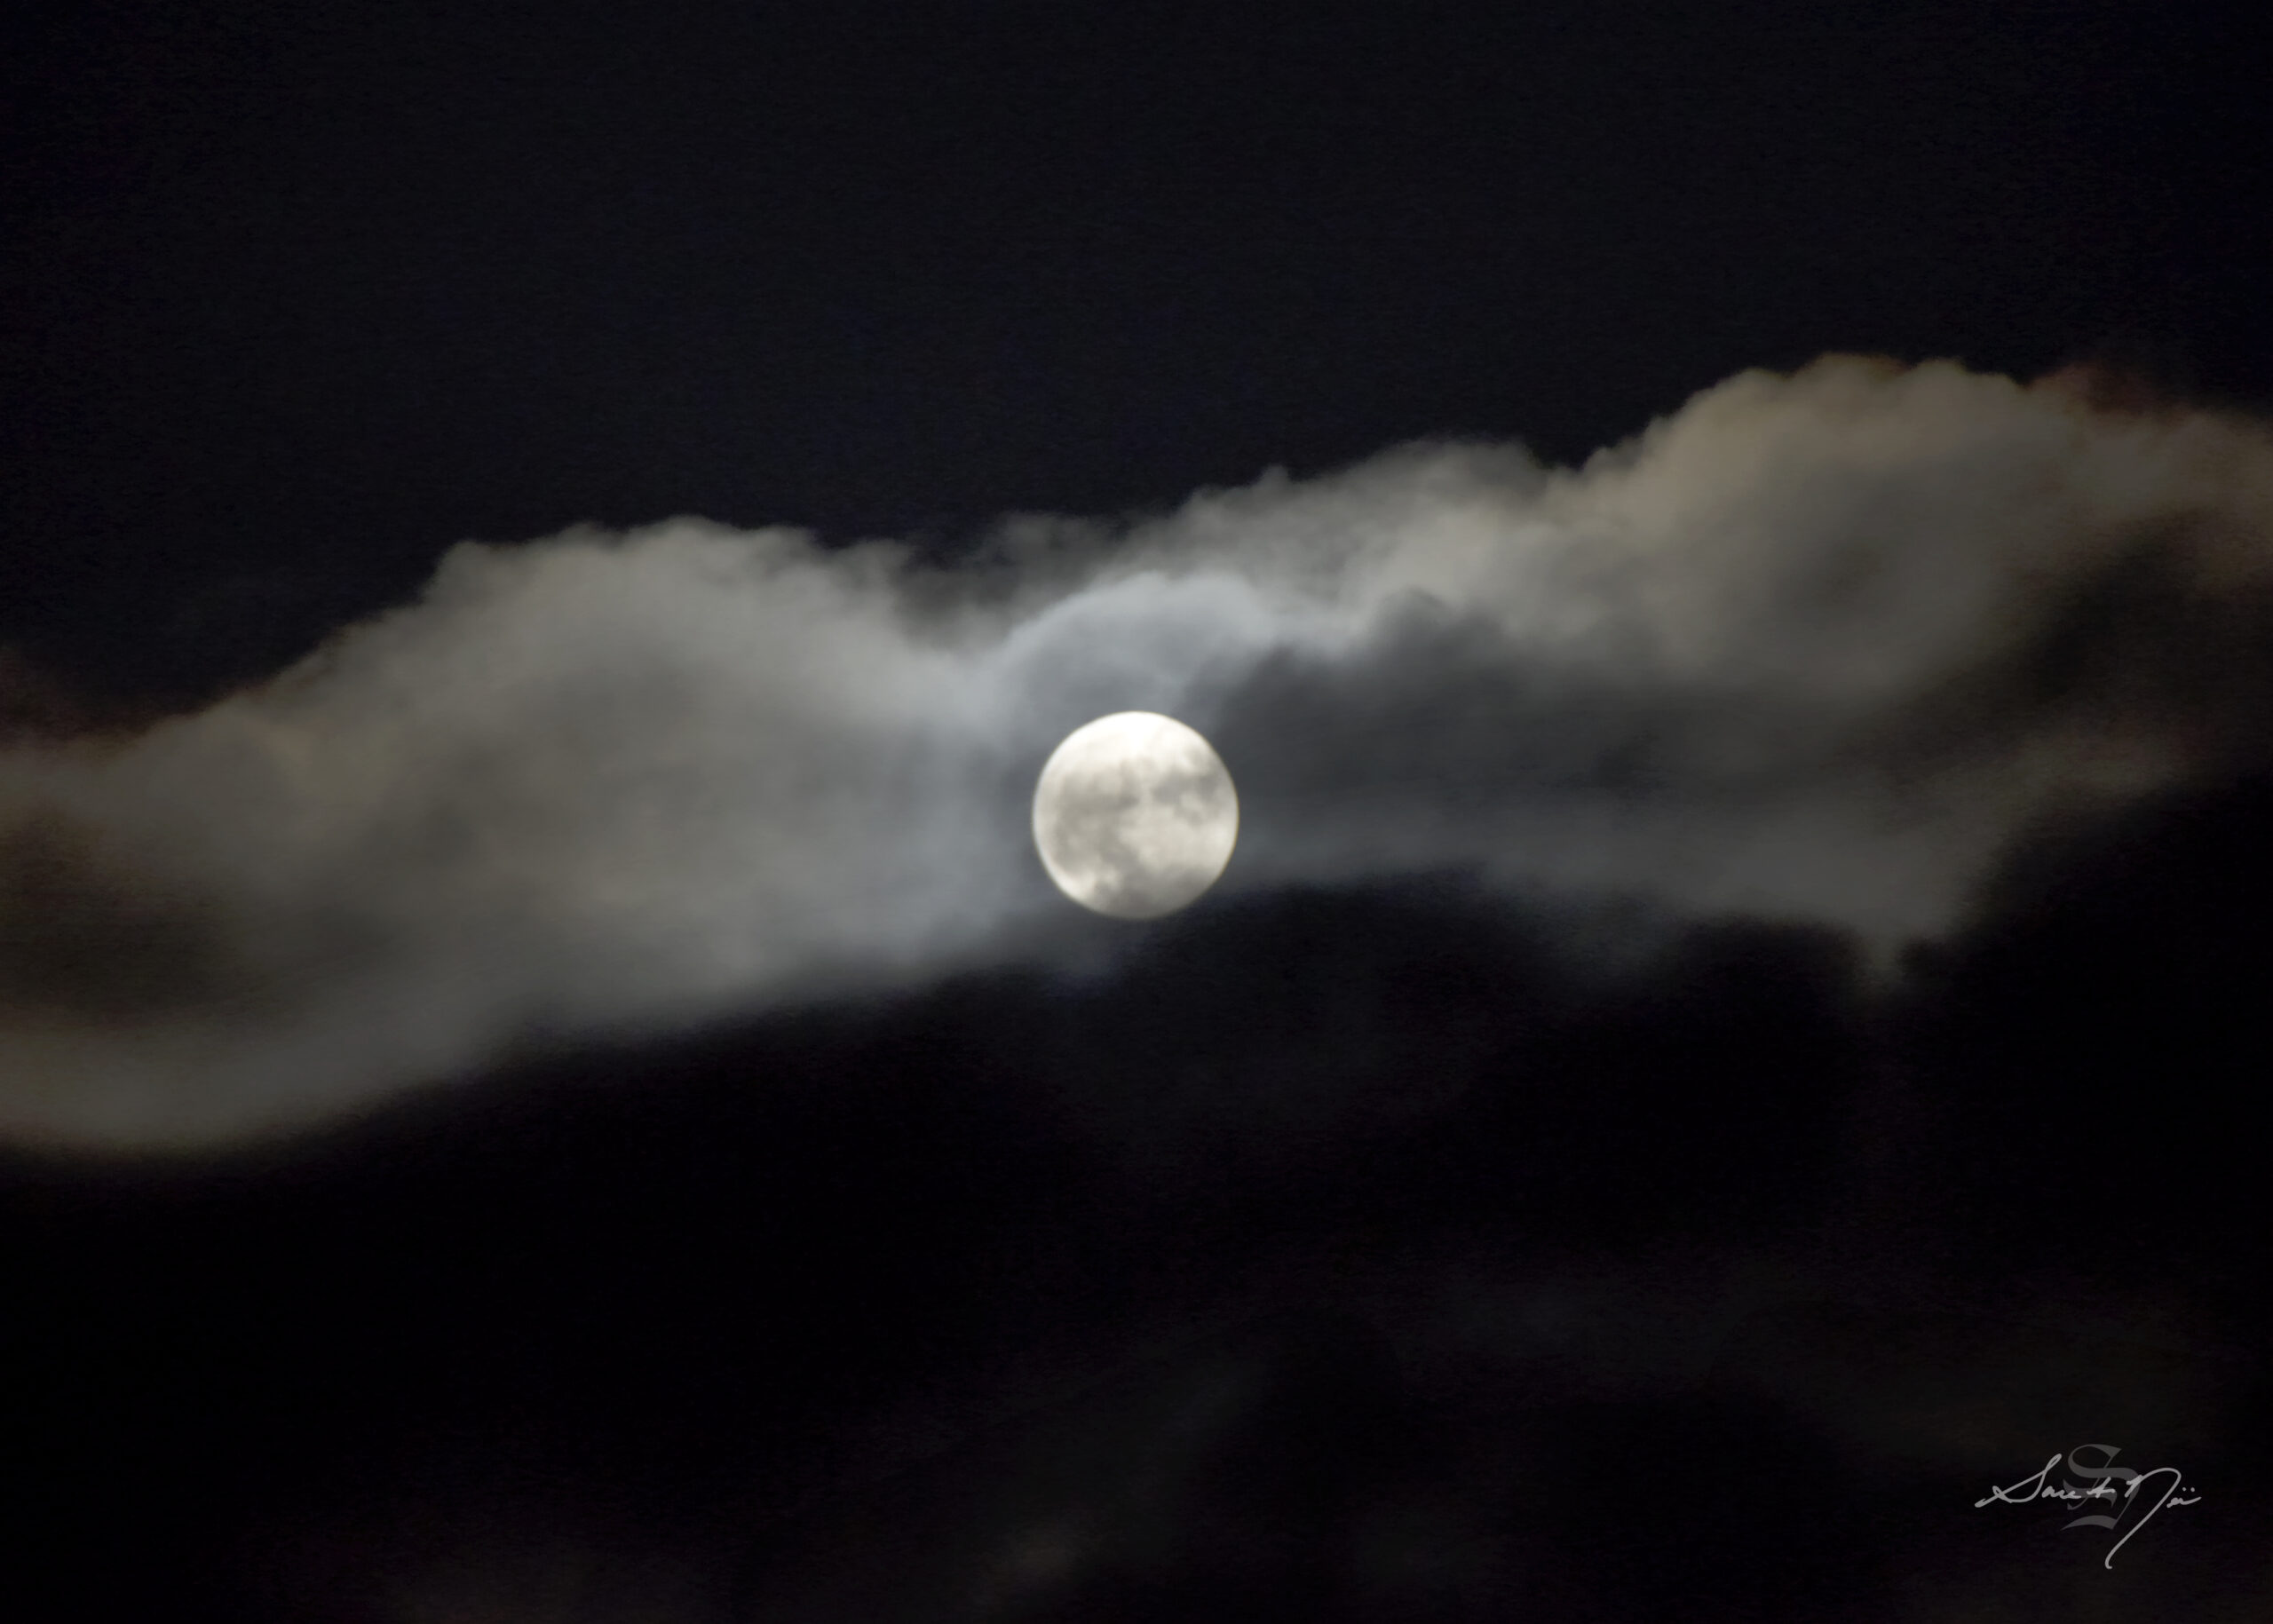 Full moon with cloud bank